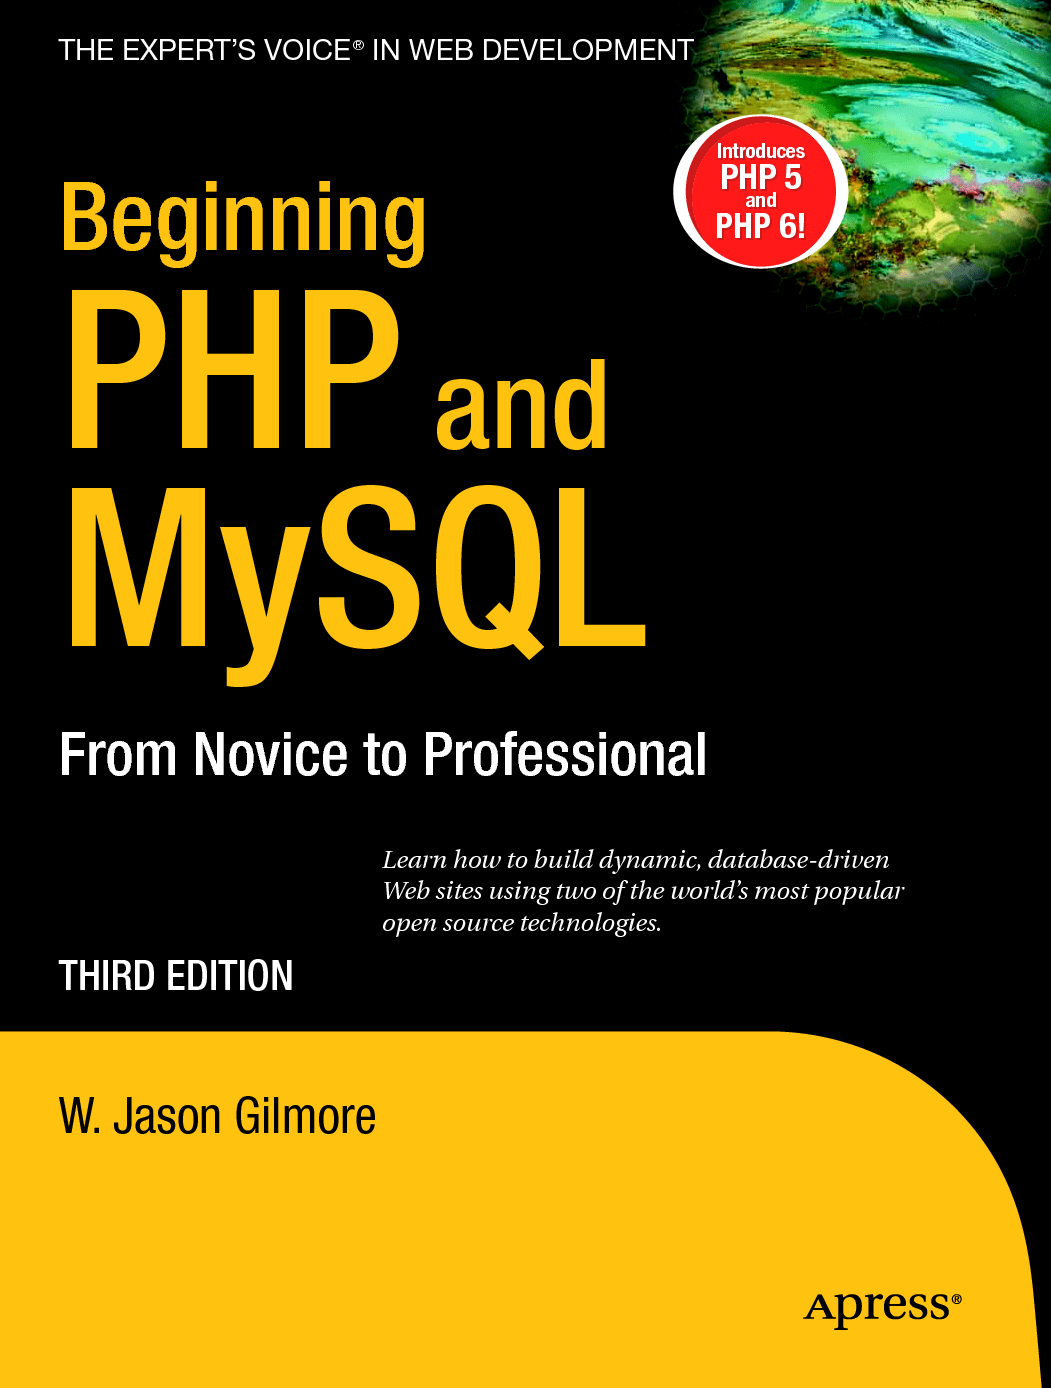 Beginning PHP and MySQL From Novice to Professional